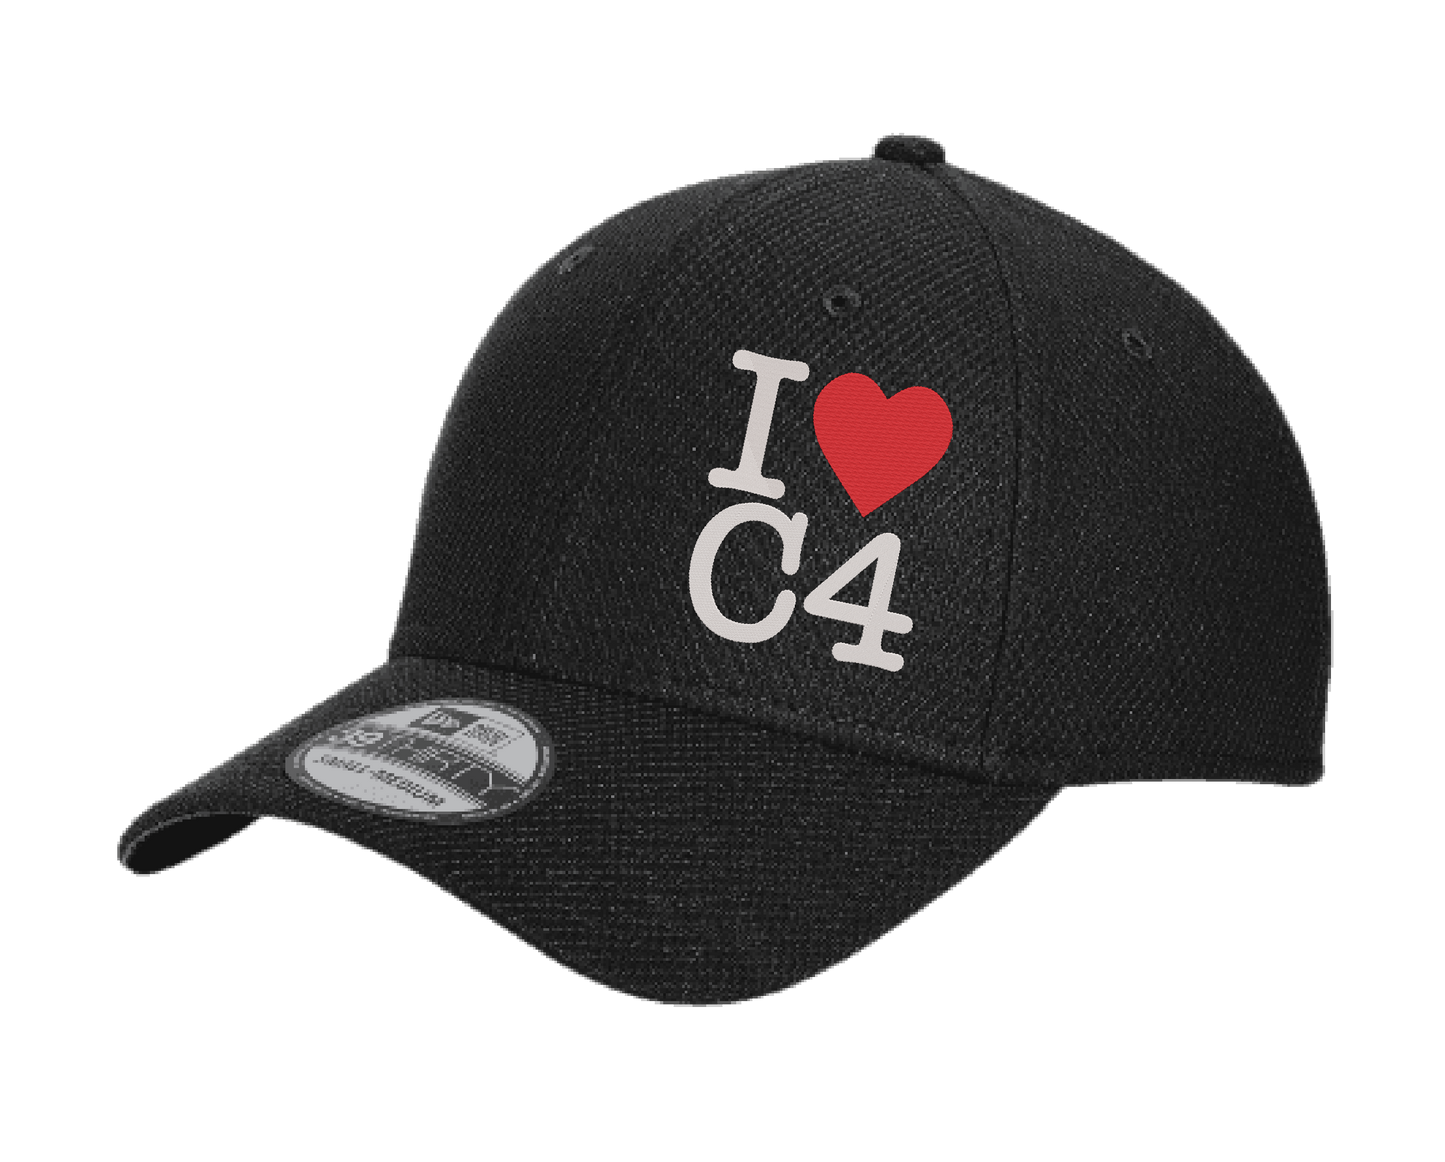 I HEART C4 Embroidered Hat | Multicam/BDU Camo Hat | Trucker/Flat Bill/Curved Bill/Dad Hat | Lots of Styles